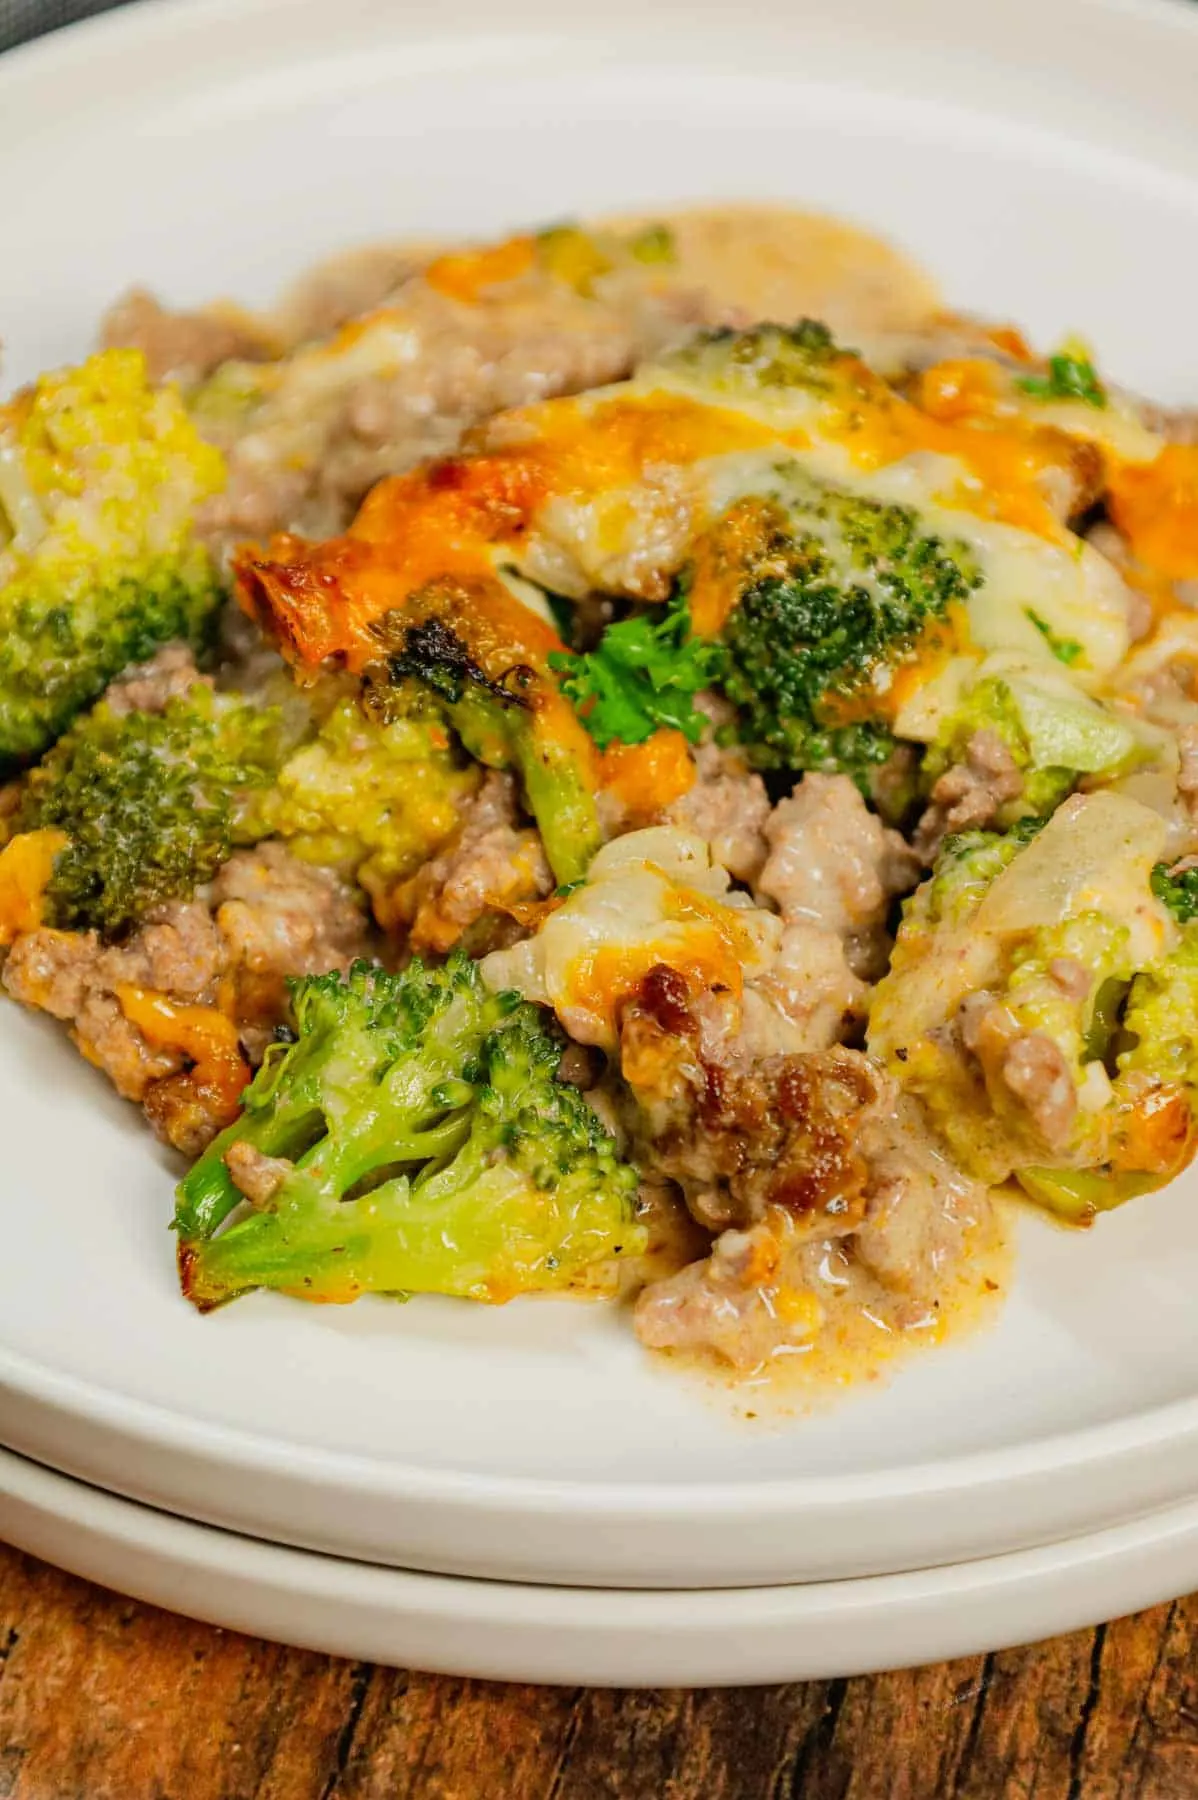 Ground Beef and Broccoli Casserole is a hearty dish loaded with ground beef, broccoli florets, diced onions, alfredo sauce, Italian seasoning, mozzarella cheese and cheddar cheese.